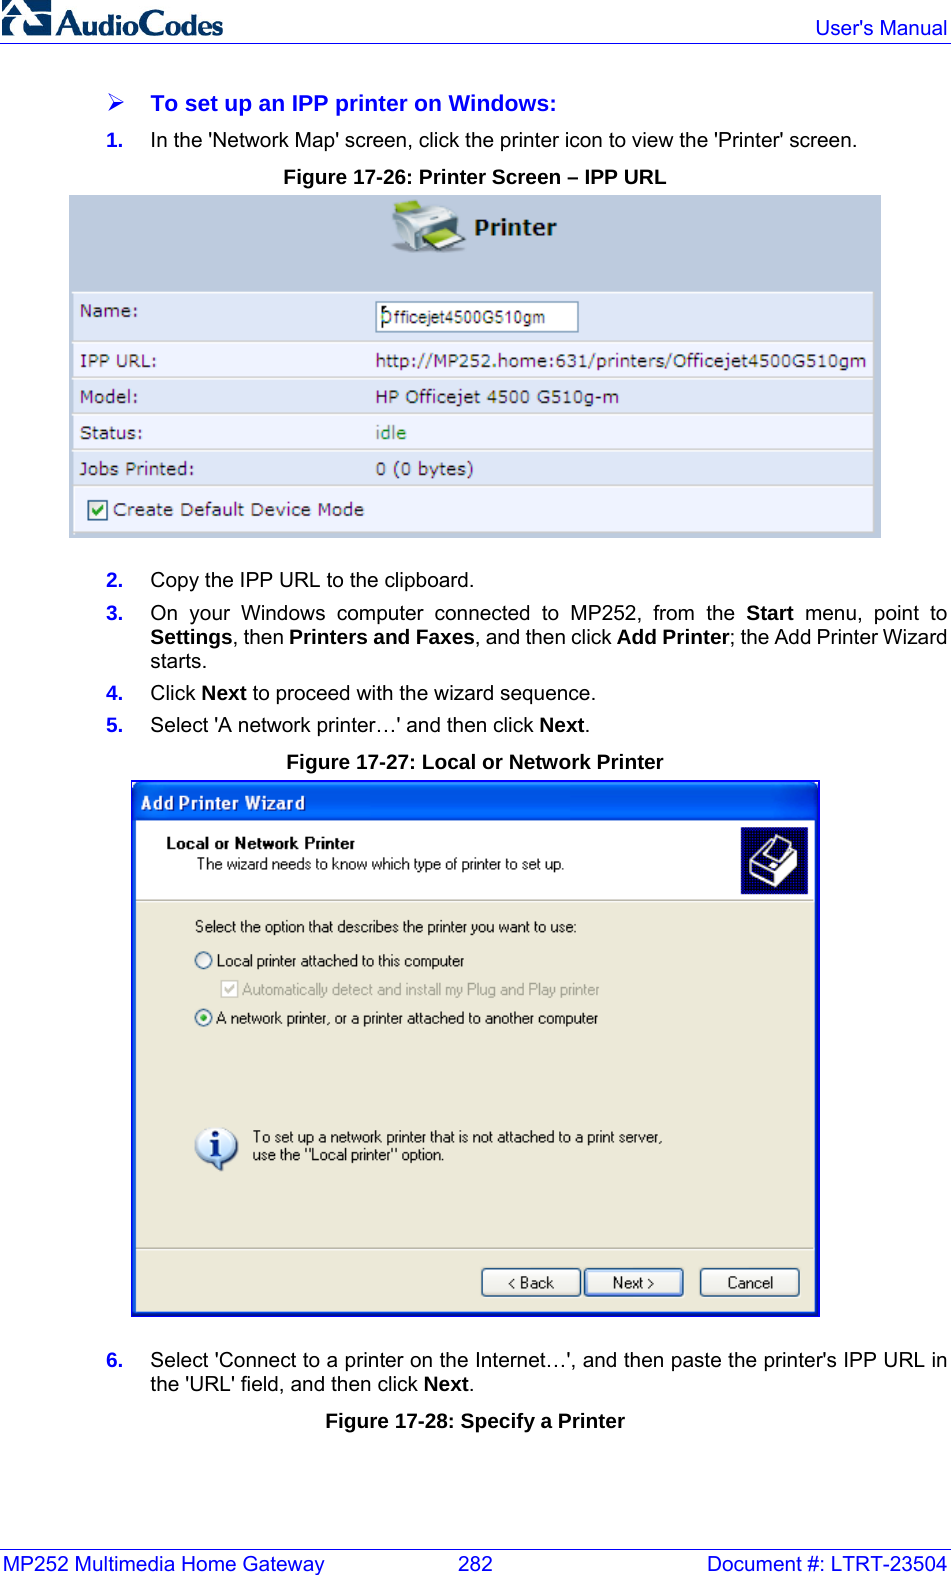 MP252 Multimedia Home Gateway  282  Document #: LTRT-23504  User&apos;s Manual  ¾ To set up an IPP printer on Windows: 1.  In the &apos;Network Map&apos; screen, click the printer icon to view the &apos;Printer&apos; screen. Figure 17-26: Printer Screen – IPP URL  2.  Copy the IPP URL to the clipboard. 3.  On your Windows computer connected to MP252, from the Start menu, point to Settings, then Printers and Faxes, and then click Add Printer; the Add Printer Wizard starts. 4.  Click Next to proceed with the wizard sequence. 5.  Select &apos;A network printer…&apos; and then click Next. Figure 17-27: Local or Network Printer  6.  Select &apos;Connect to a printer on the Internet…&apos;, and then paste the printer&apos;s IPP URL in the &apos;URL&apos; field, and then click Next. Figure 17-28: Specify a Printer 